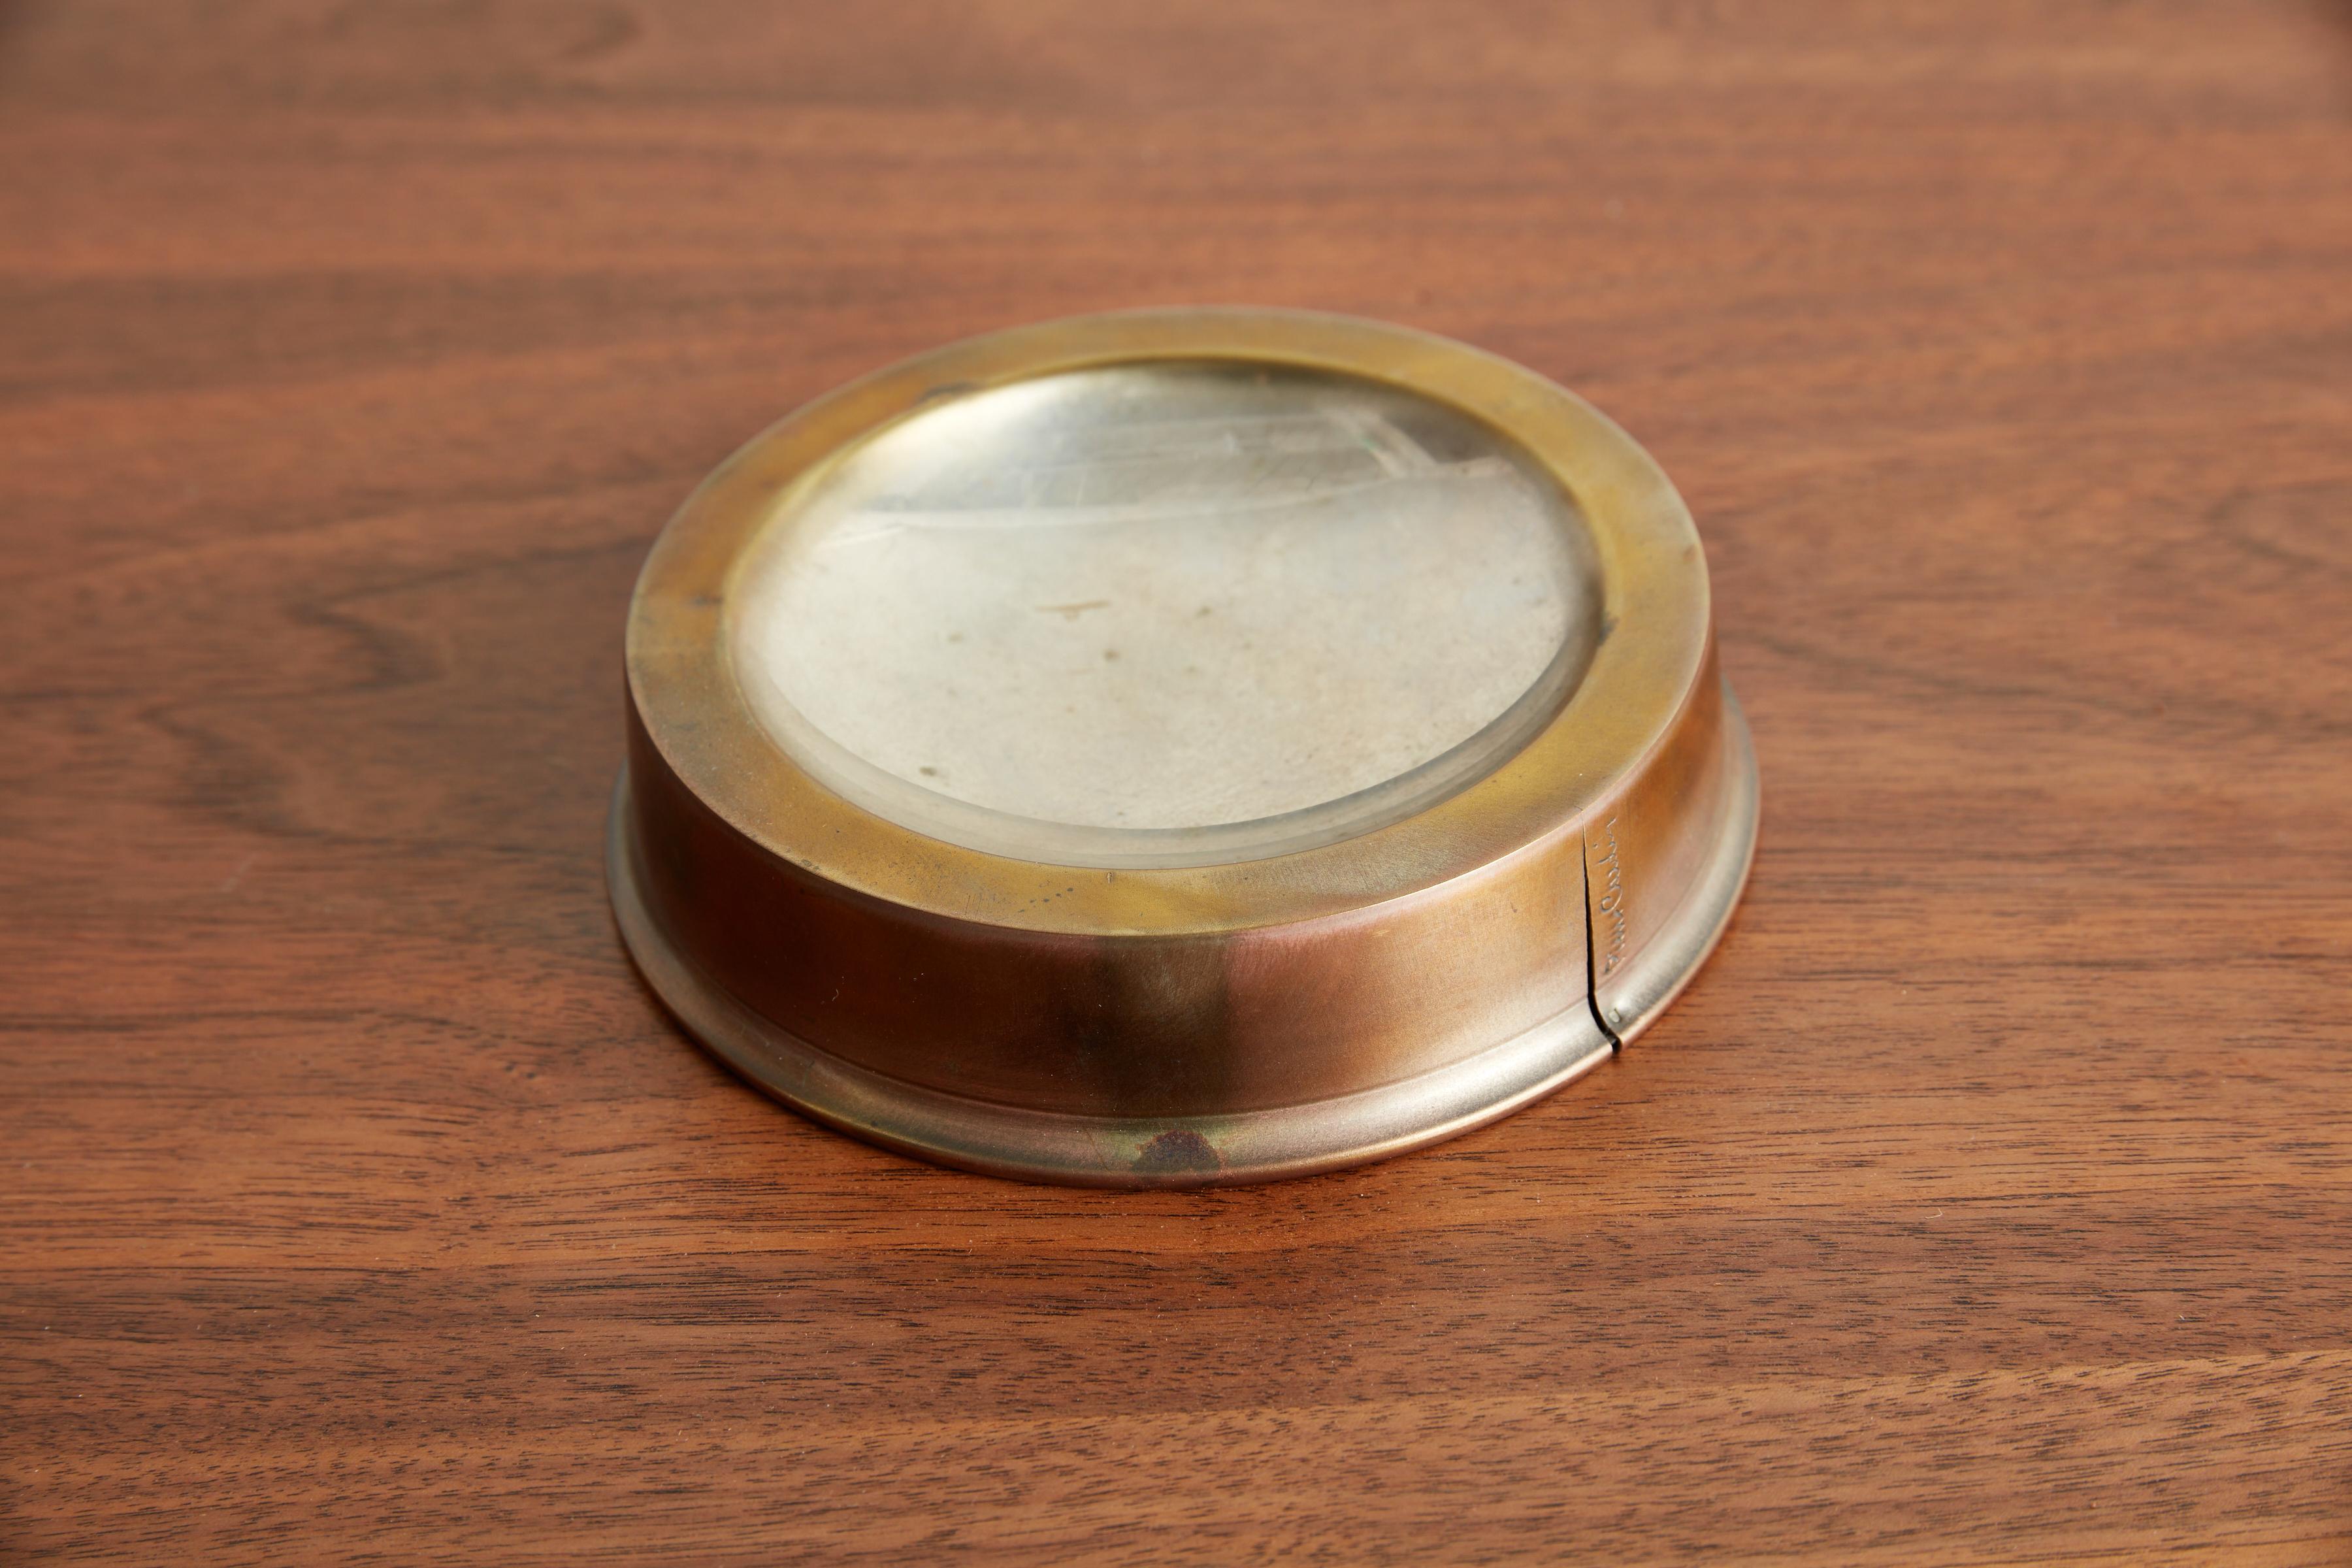 Pierre Cardin brass ashtray with wonderful patina
Signed 
France, circa 1970s.